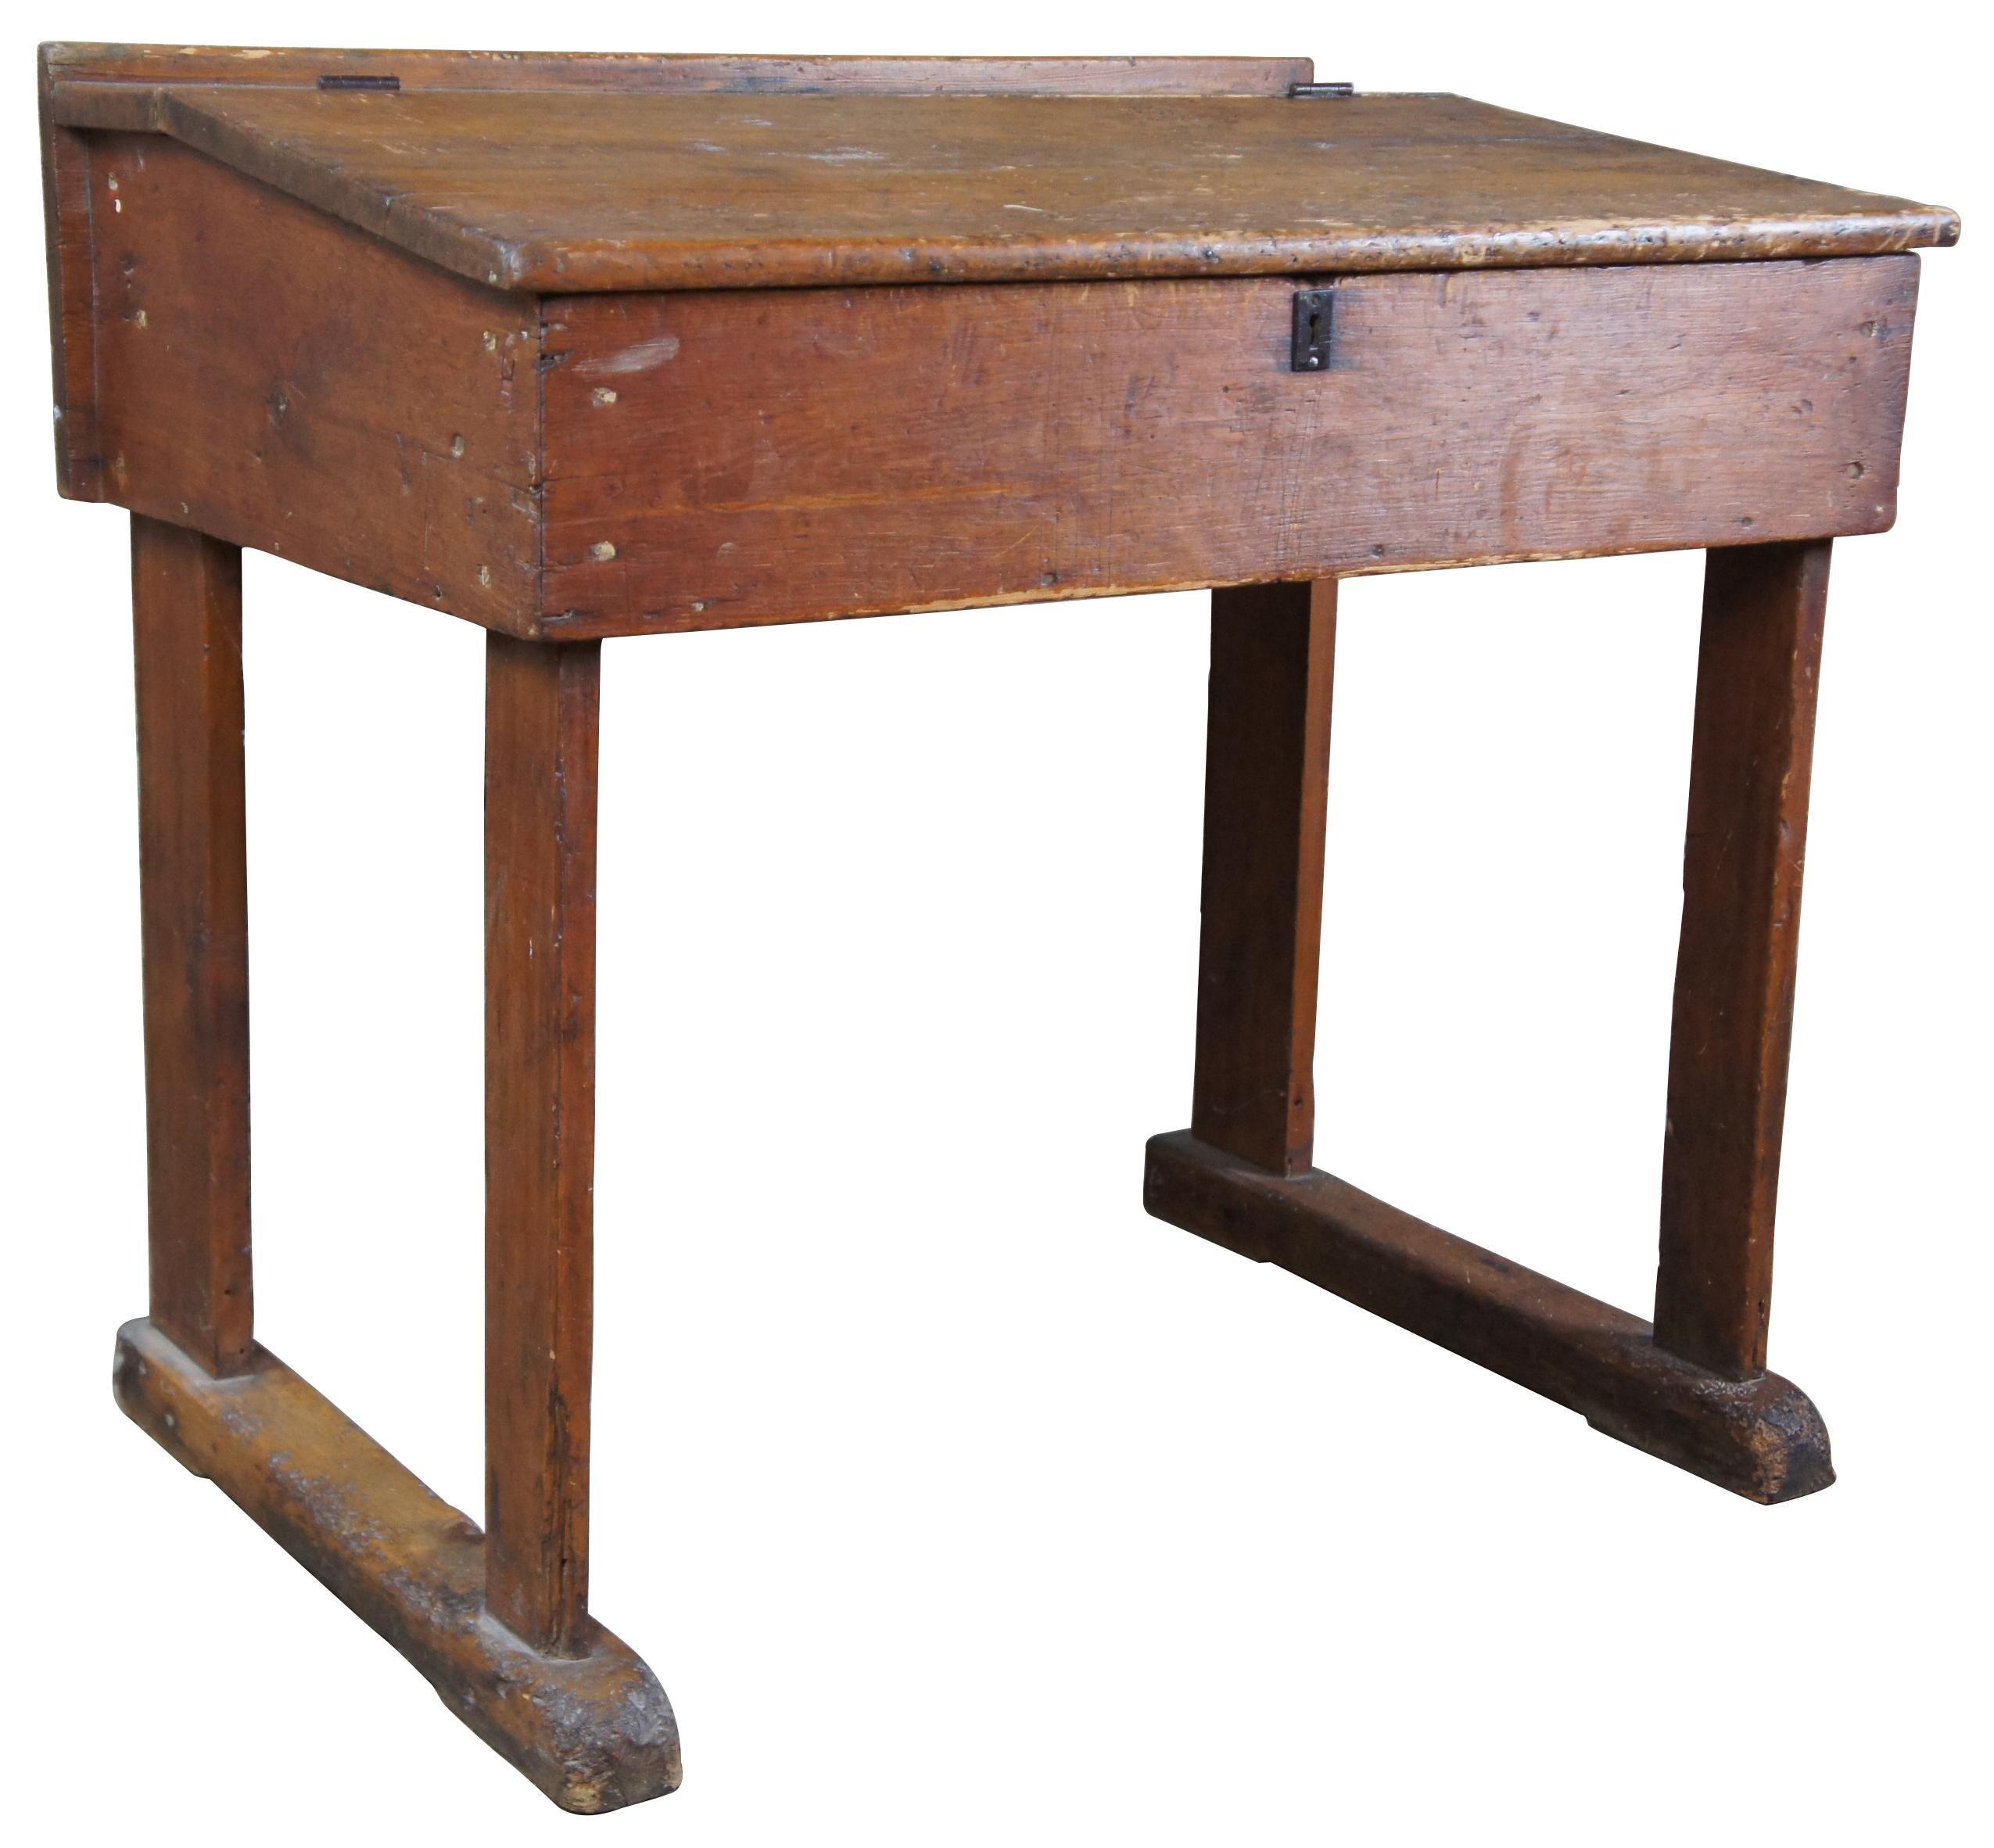 American pine slant top writing desk, circa 19th century. Features an aged distressed patina. Great for use or display! 
 
Height at bottom of slant - 32